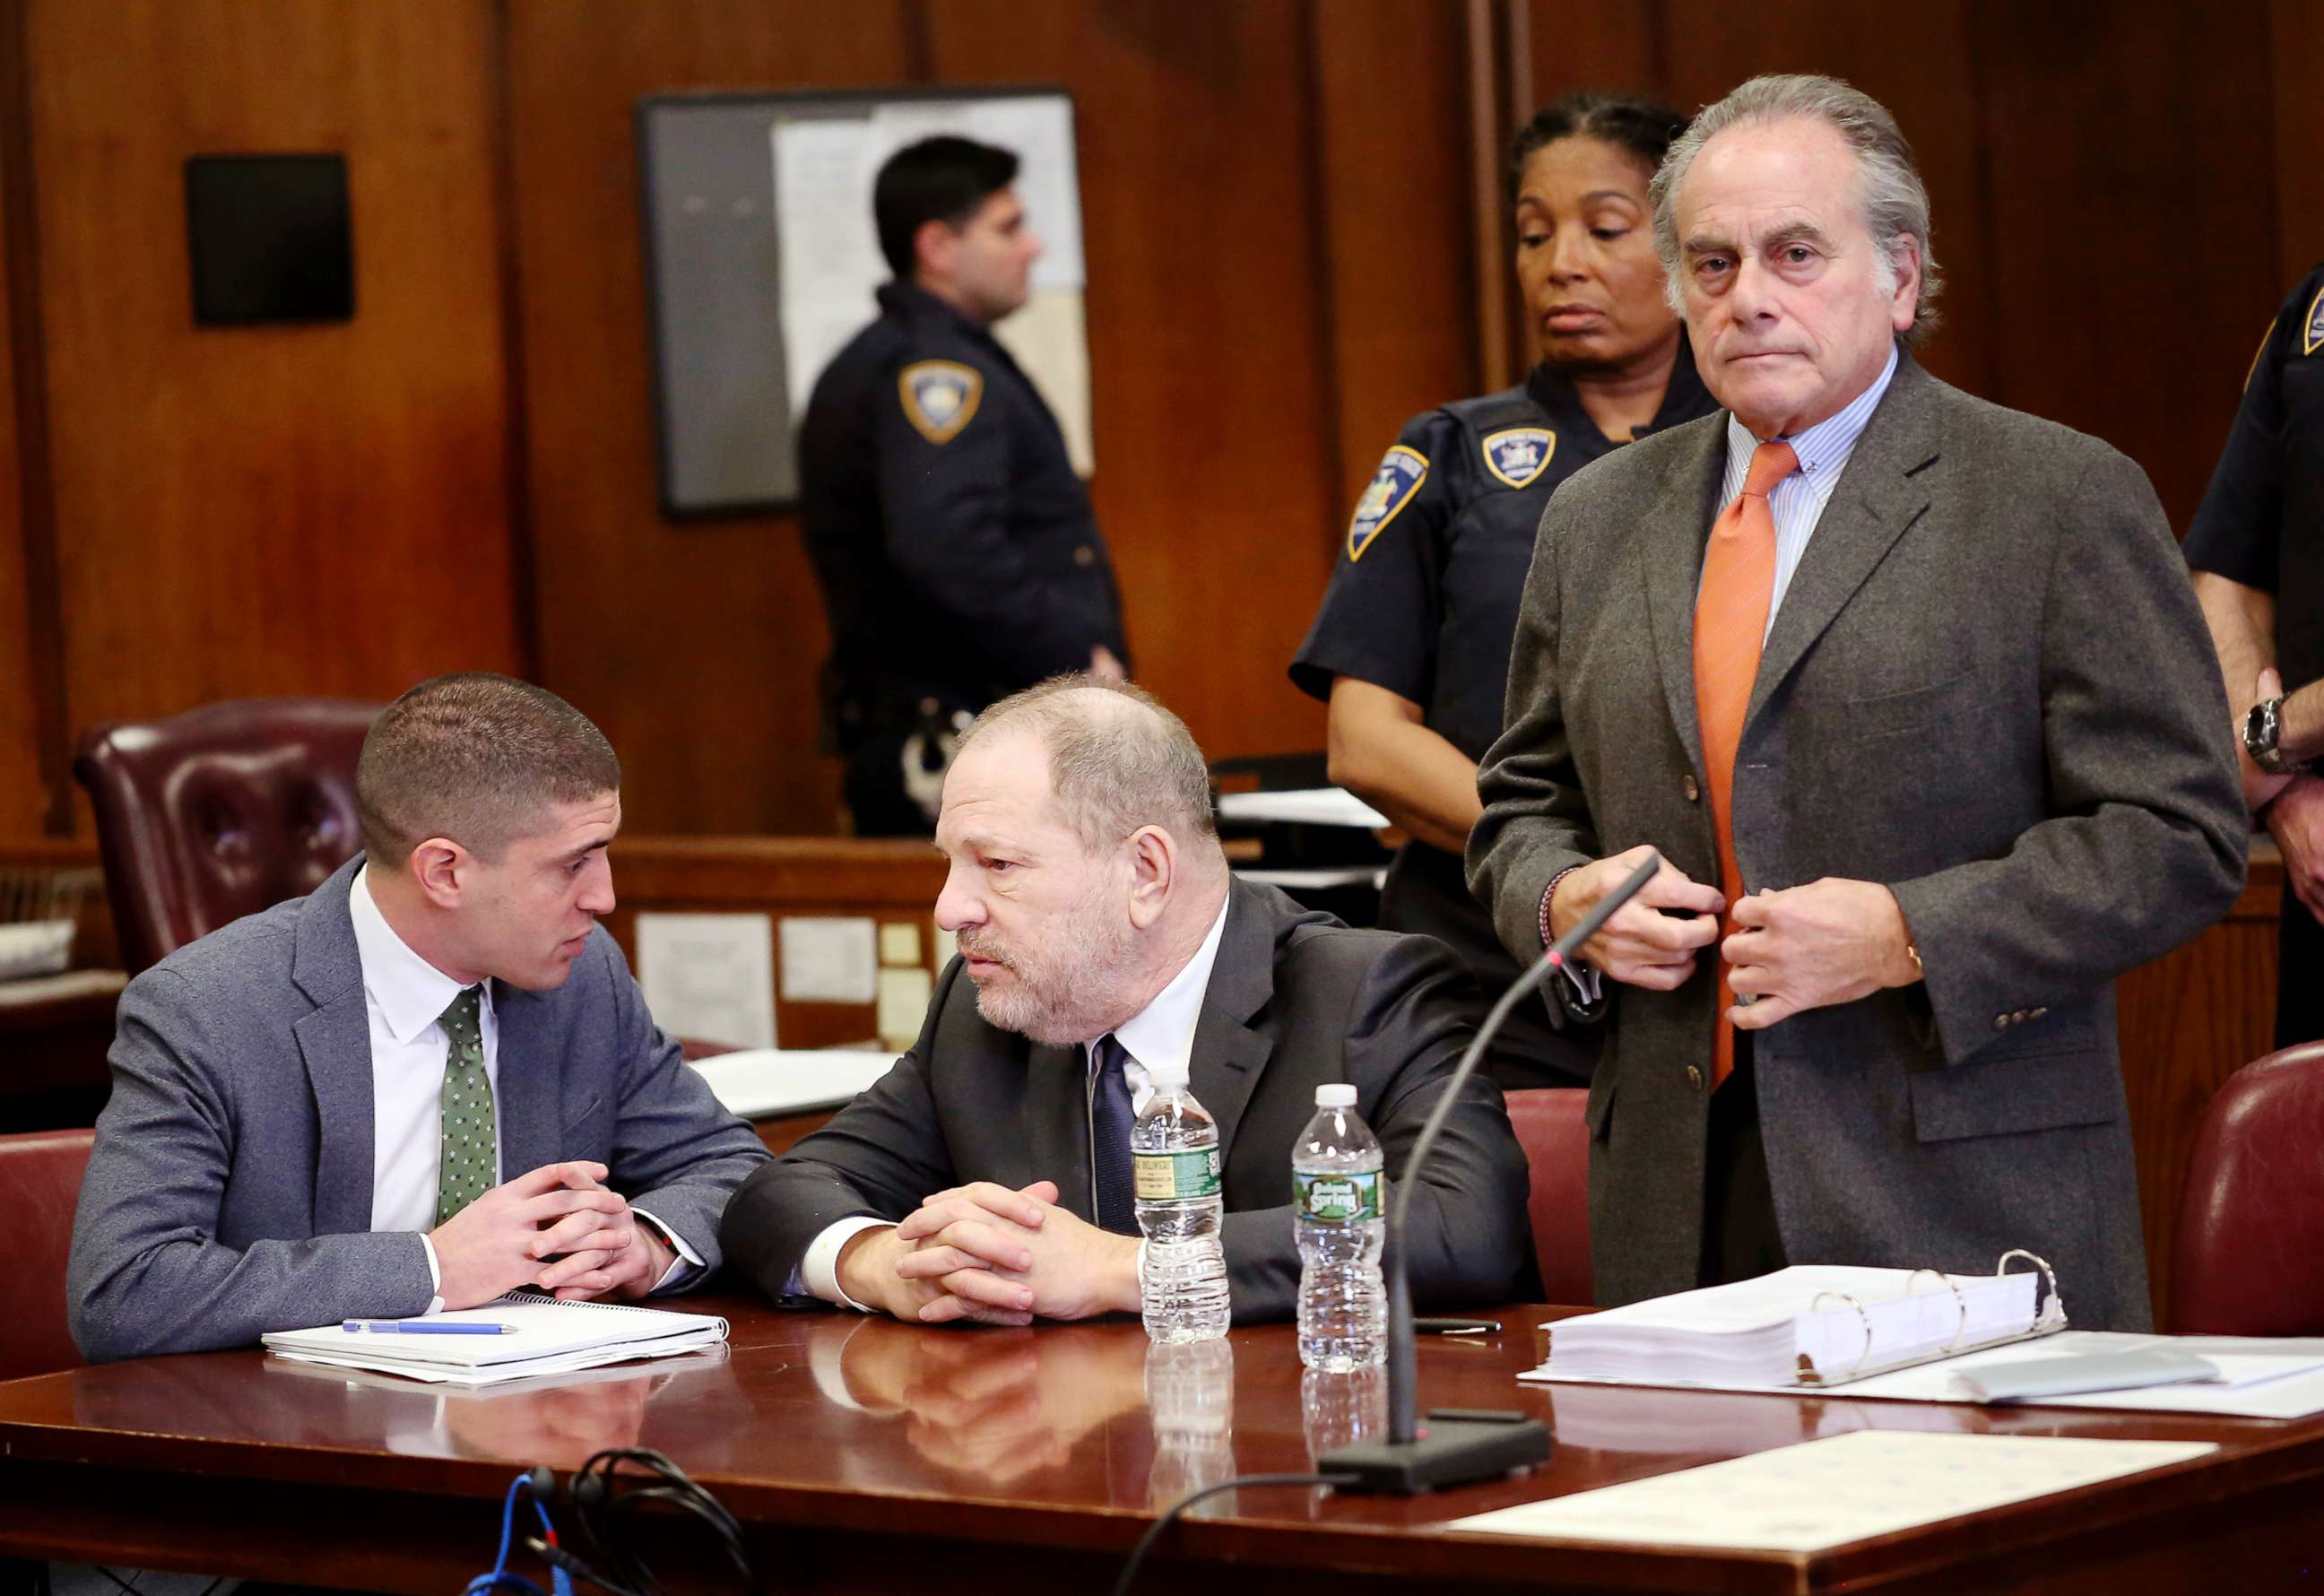 PHOTO: Harvey Weinstein, center, and his attorney Ben Brafman, right, make an appearance in court at New York Supreme Court, Dec. 20, 2018, in N.Y.